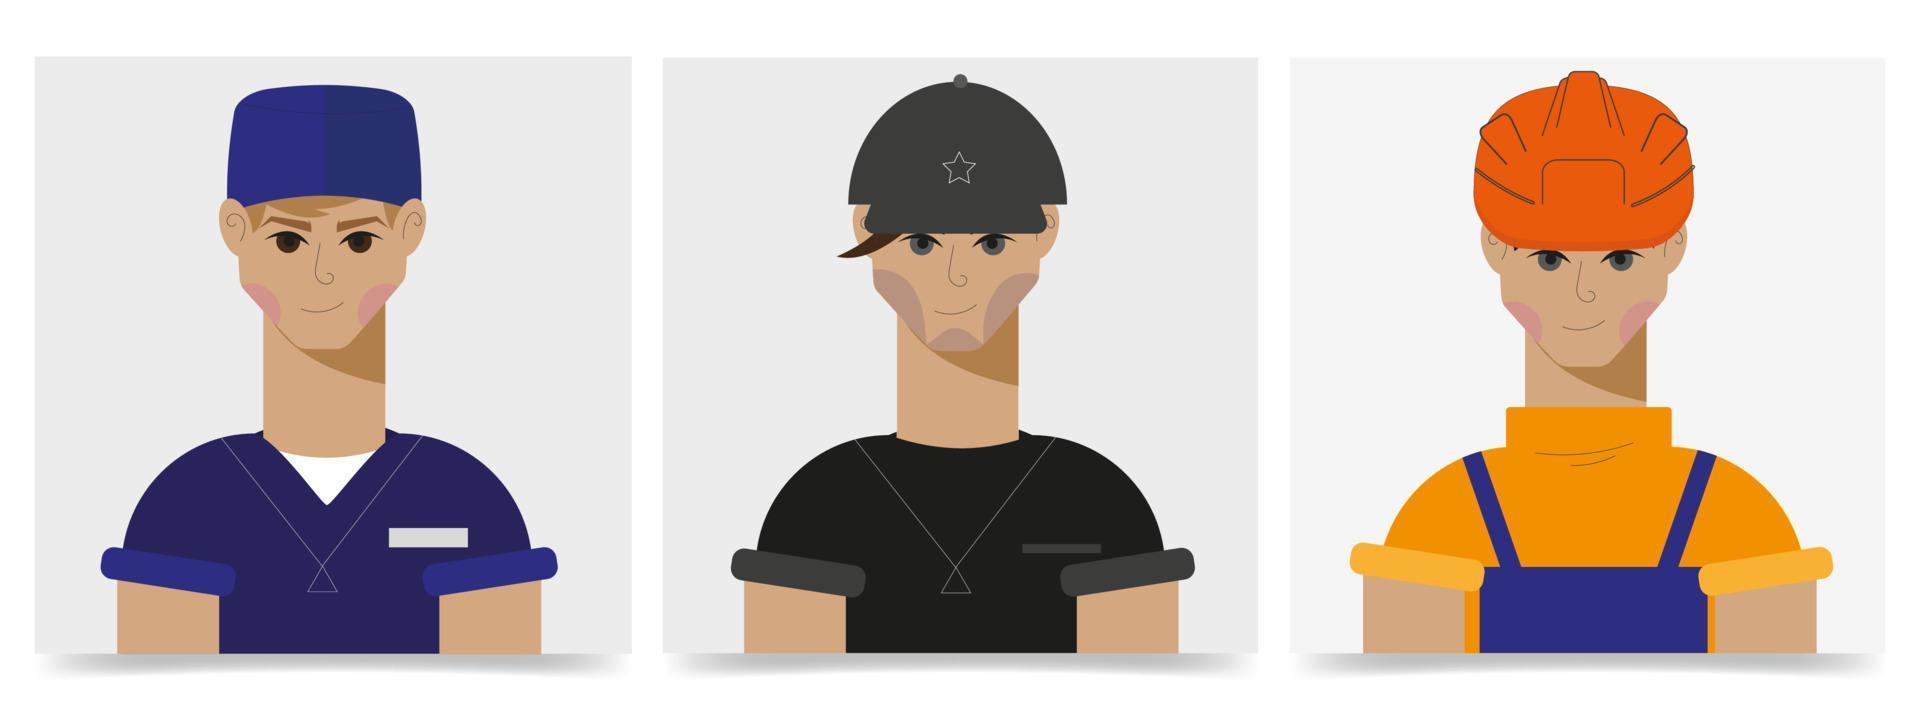 man of different profession vector